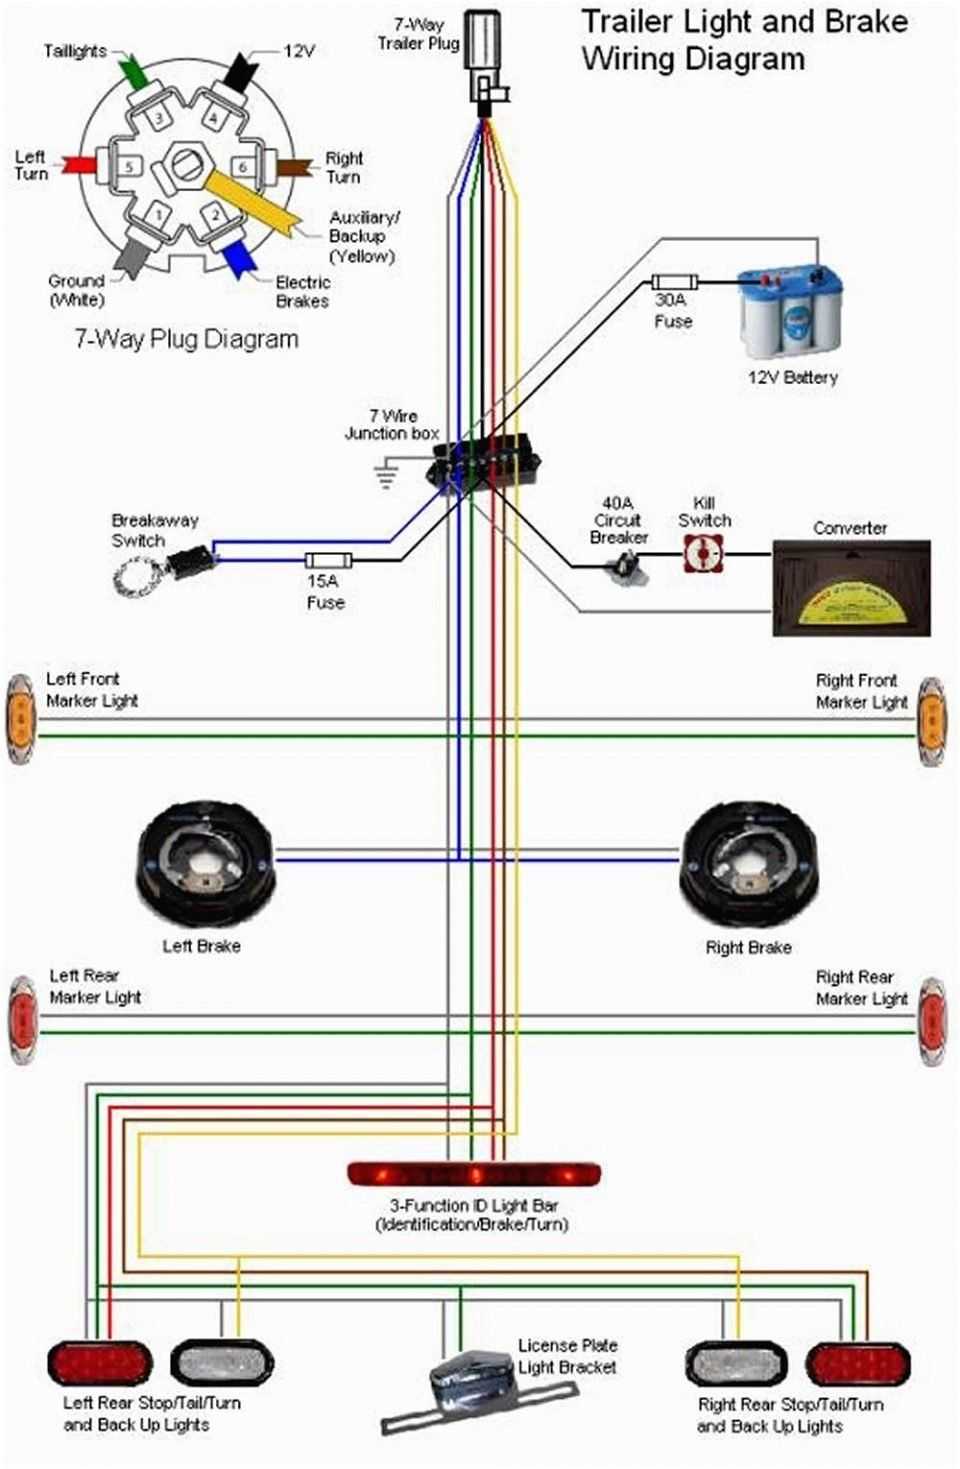 Bargman Breakaway Switch Wiring, Wiring Diagram For Trailer With Electric Brakes And Breakaway